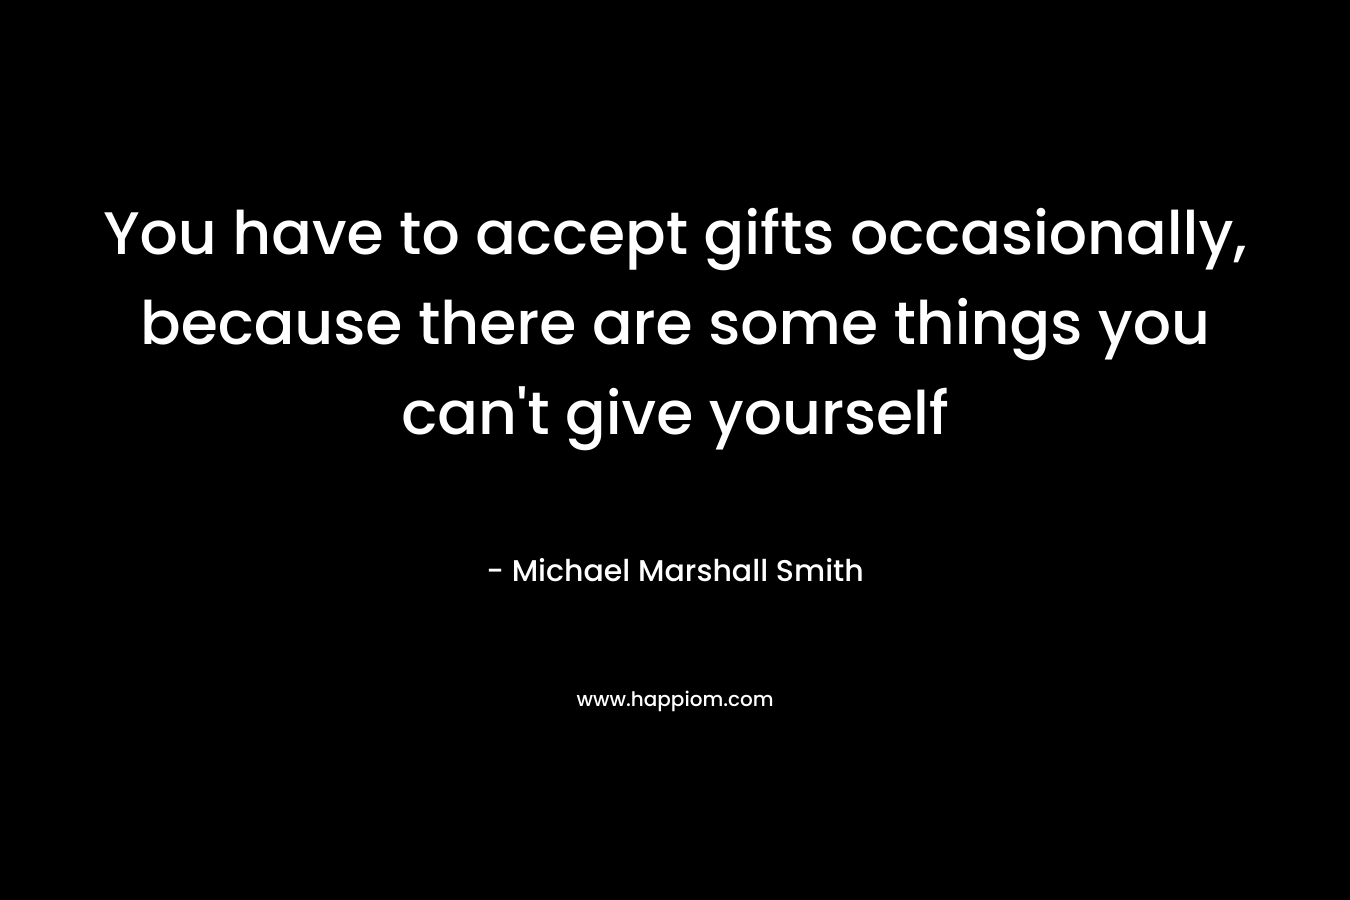 You have to accept gifts occasionally, because there are some things you can’t give yourself – Michael Marshall Smith